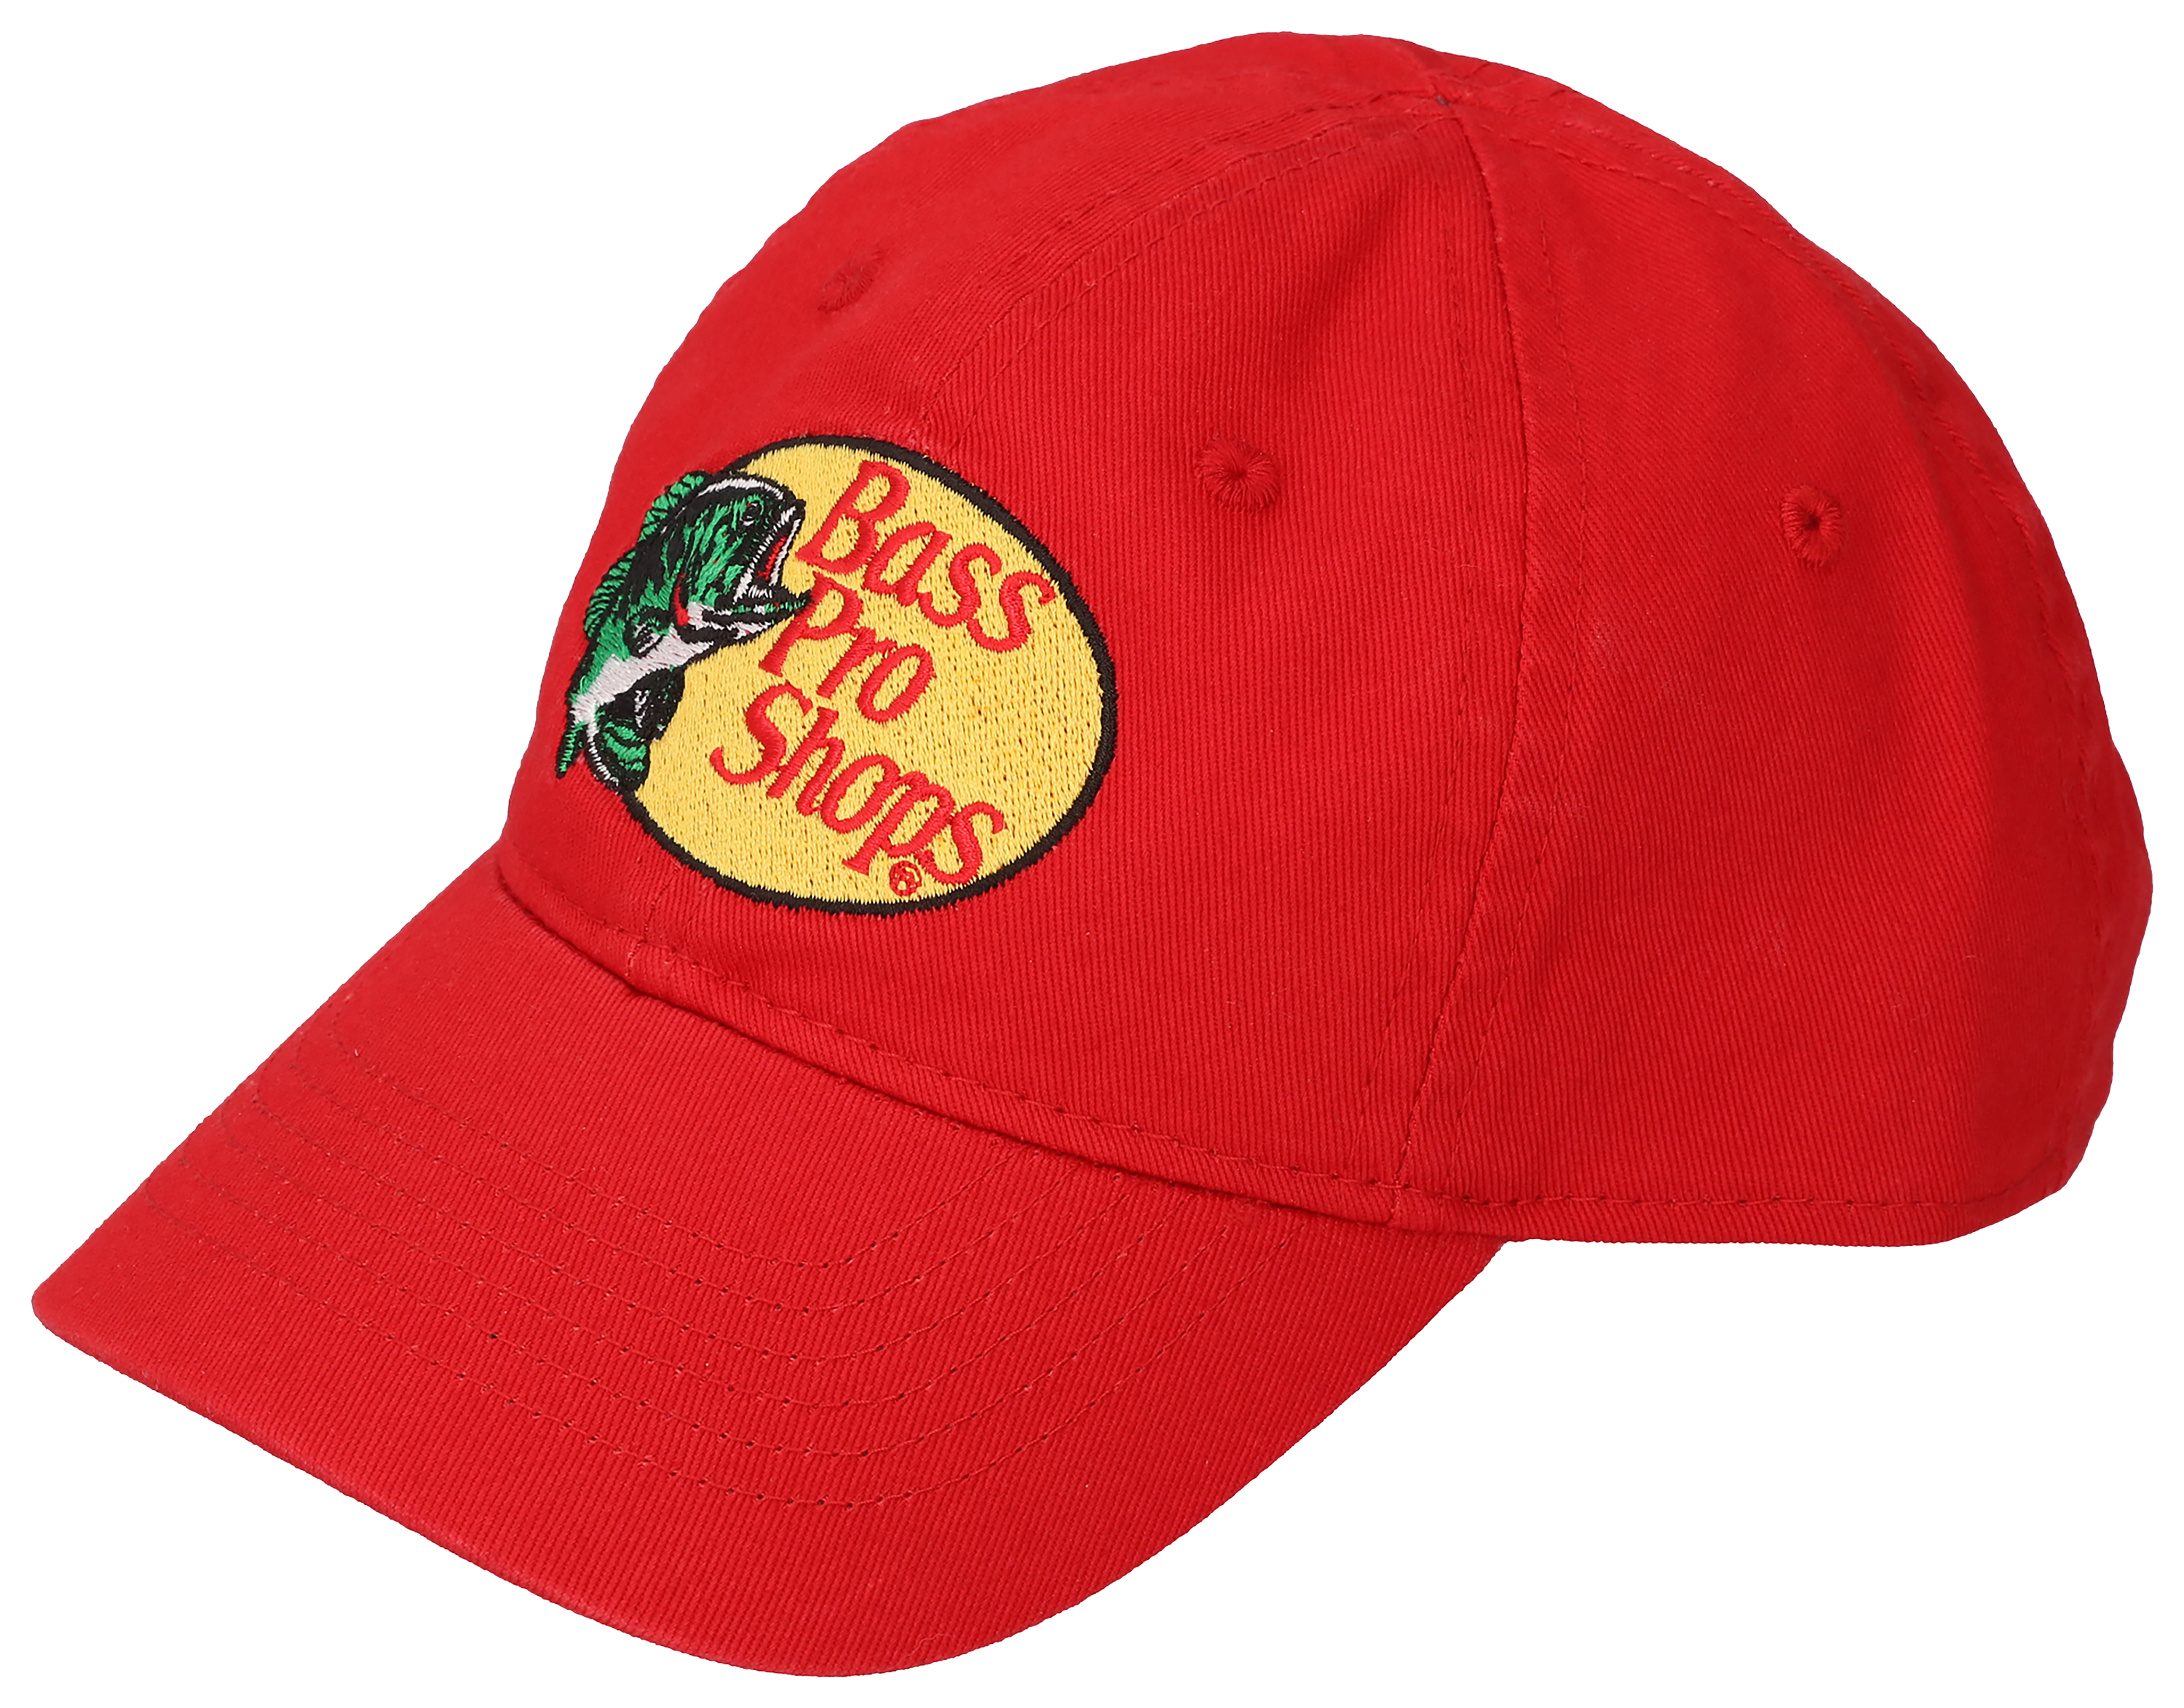 Bass Pro Shops Leaping Bass Logo Twill Cap for Toddlers